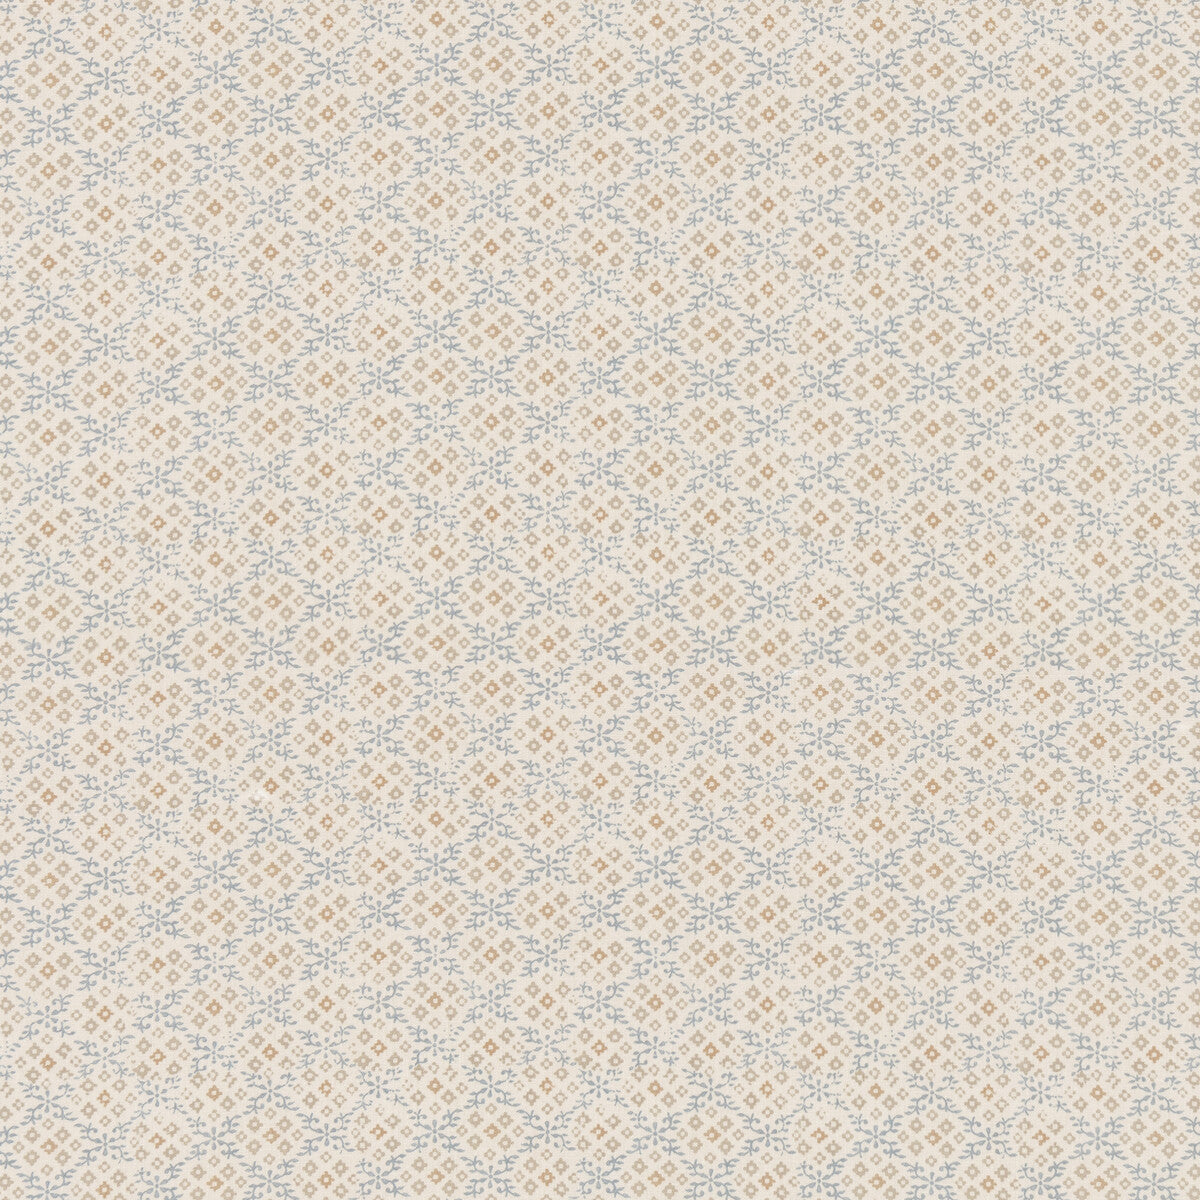 Grantly fabric in blue/sand color - pattern BP11001.5.0 - by G P &amp; J Baker in the House Small Prints collection